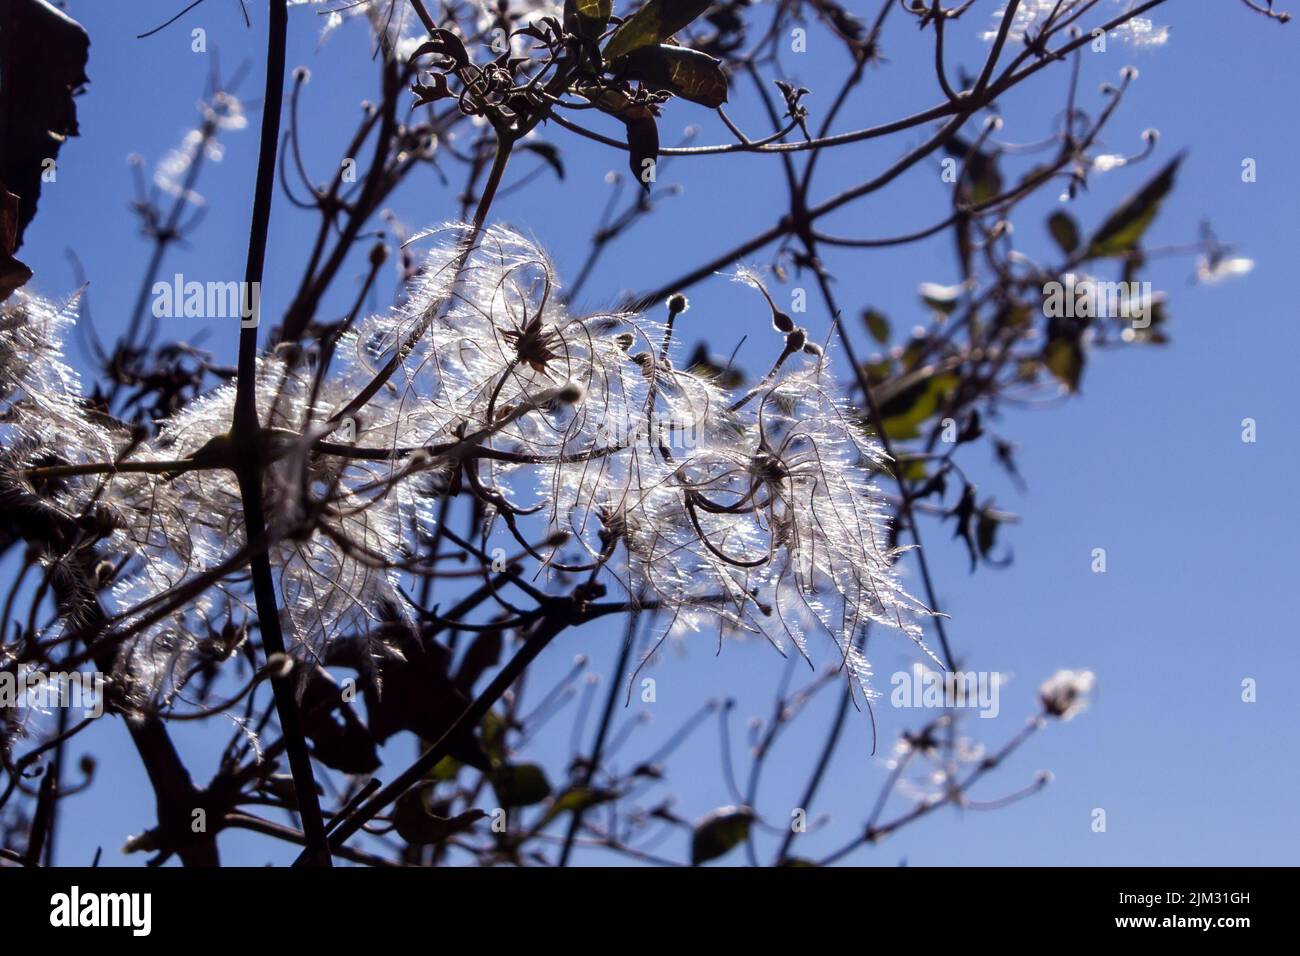 The delicate, white, feathery seeds of Travelers Joy, Clematis Brachiata, against the blue winter’s sky in the rural North Free State of South Africa Stock Photo